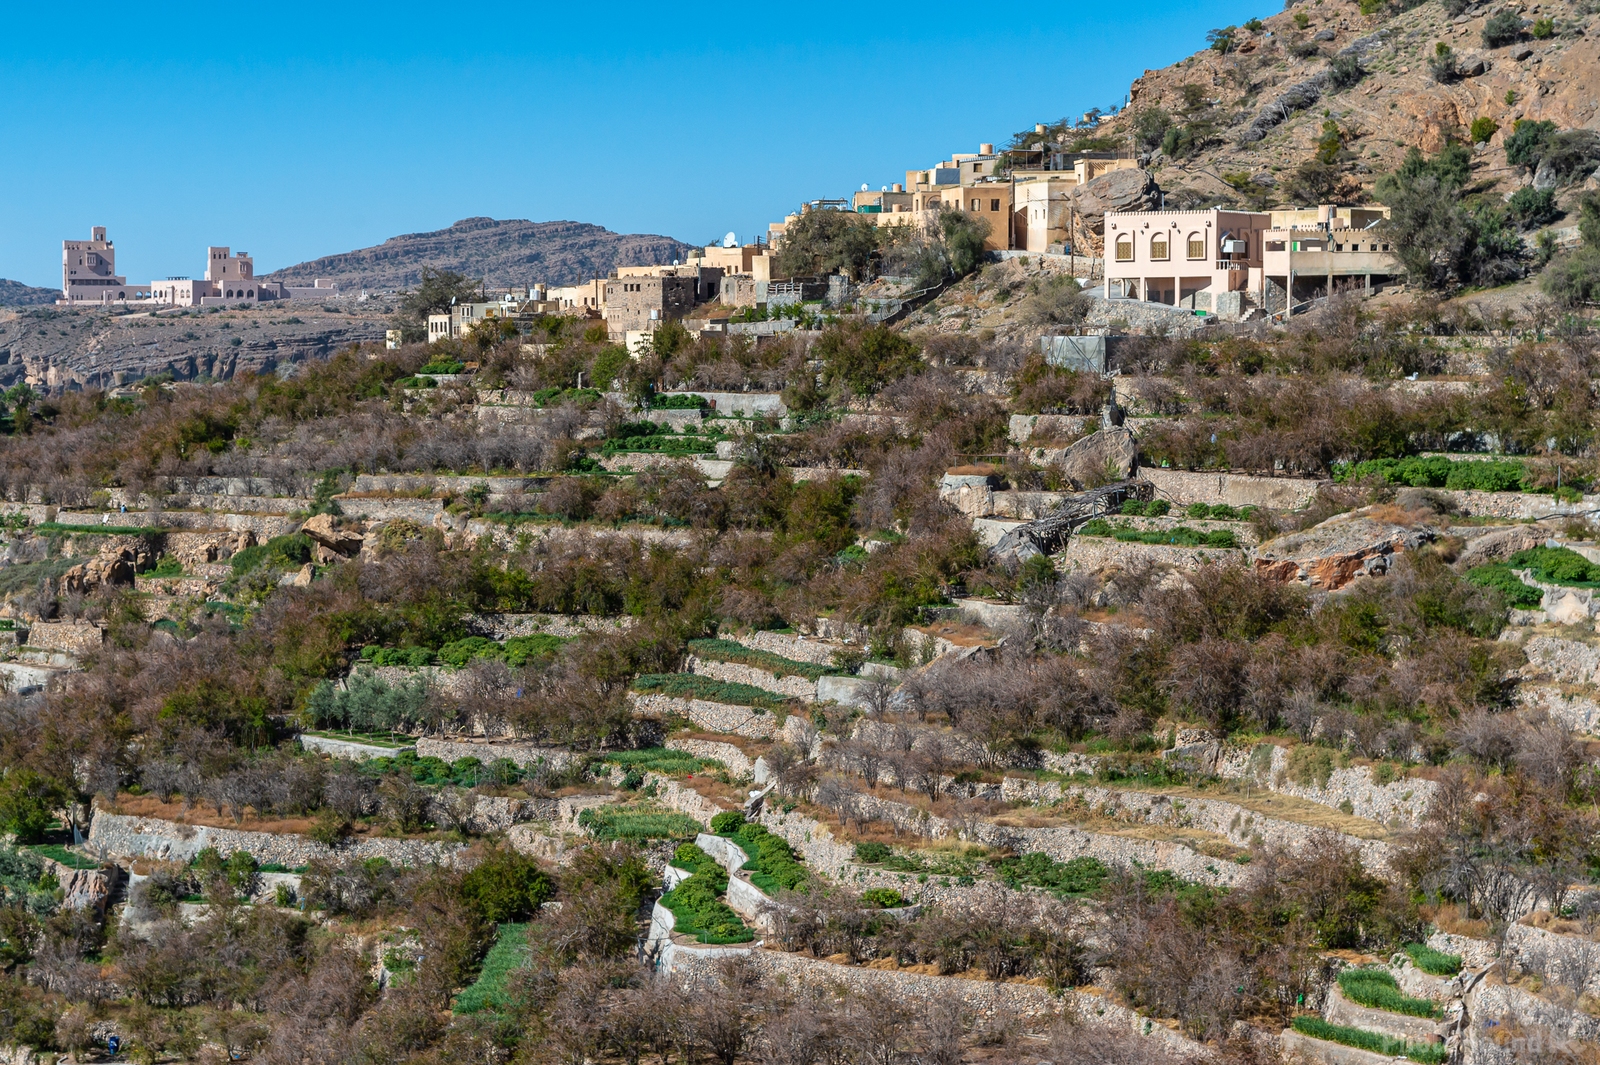 Image of Terraced Villages, Jebel Akhdar by Sue Wolfe